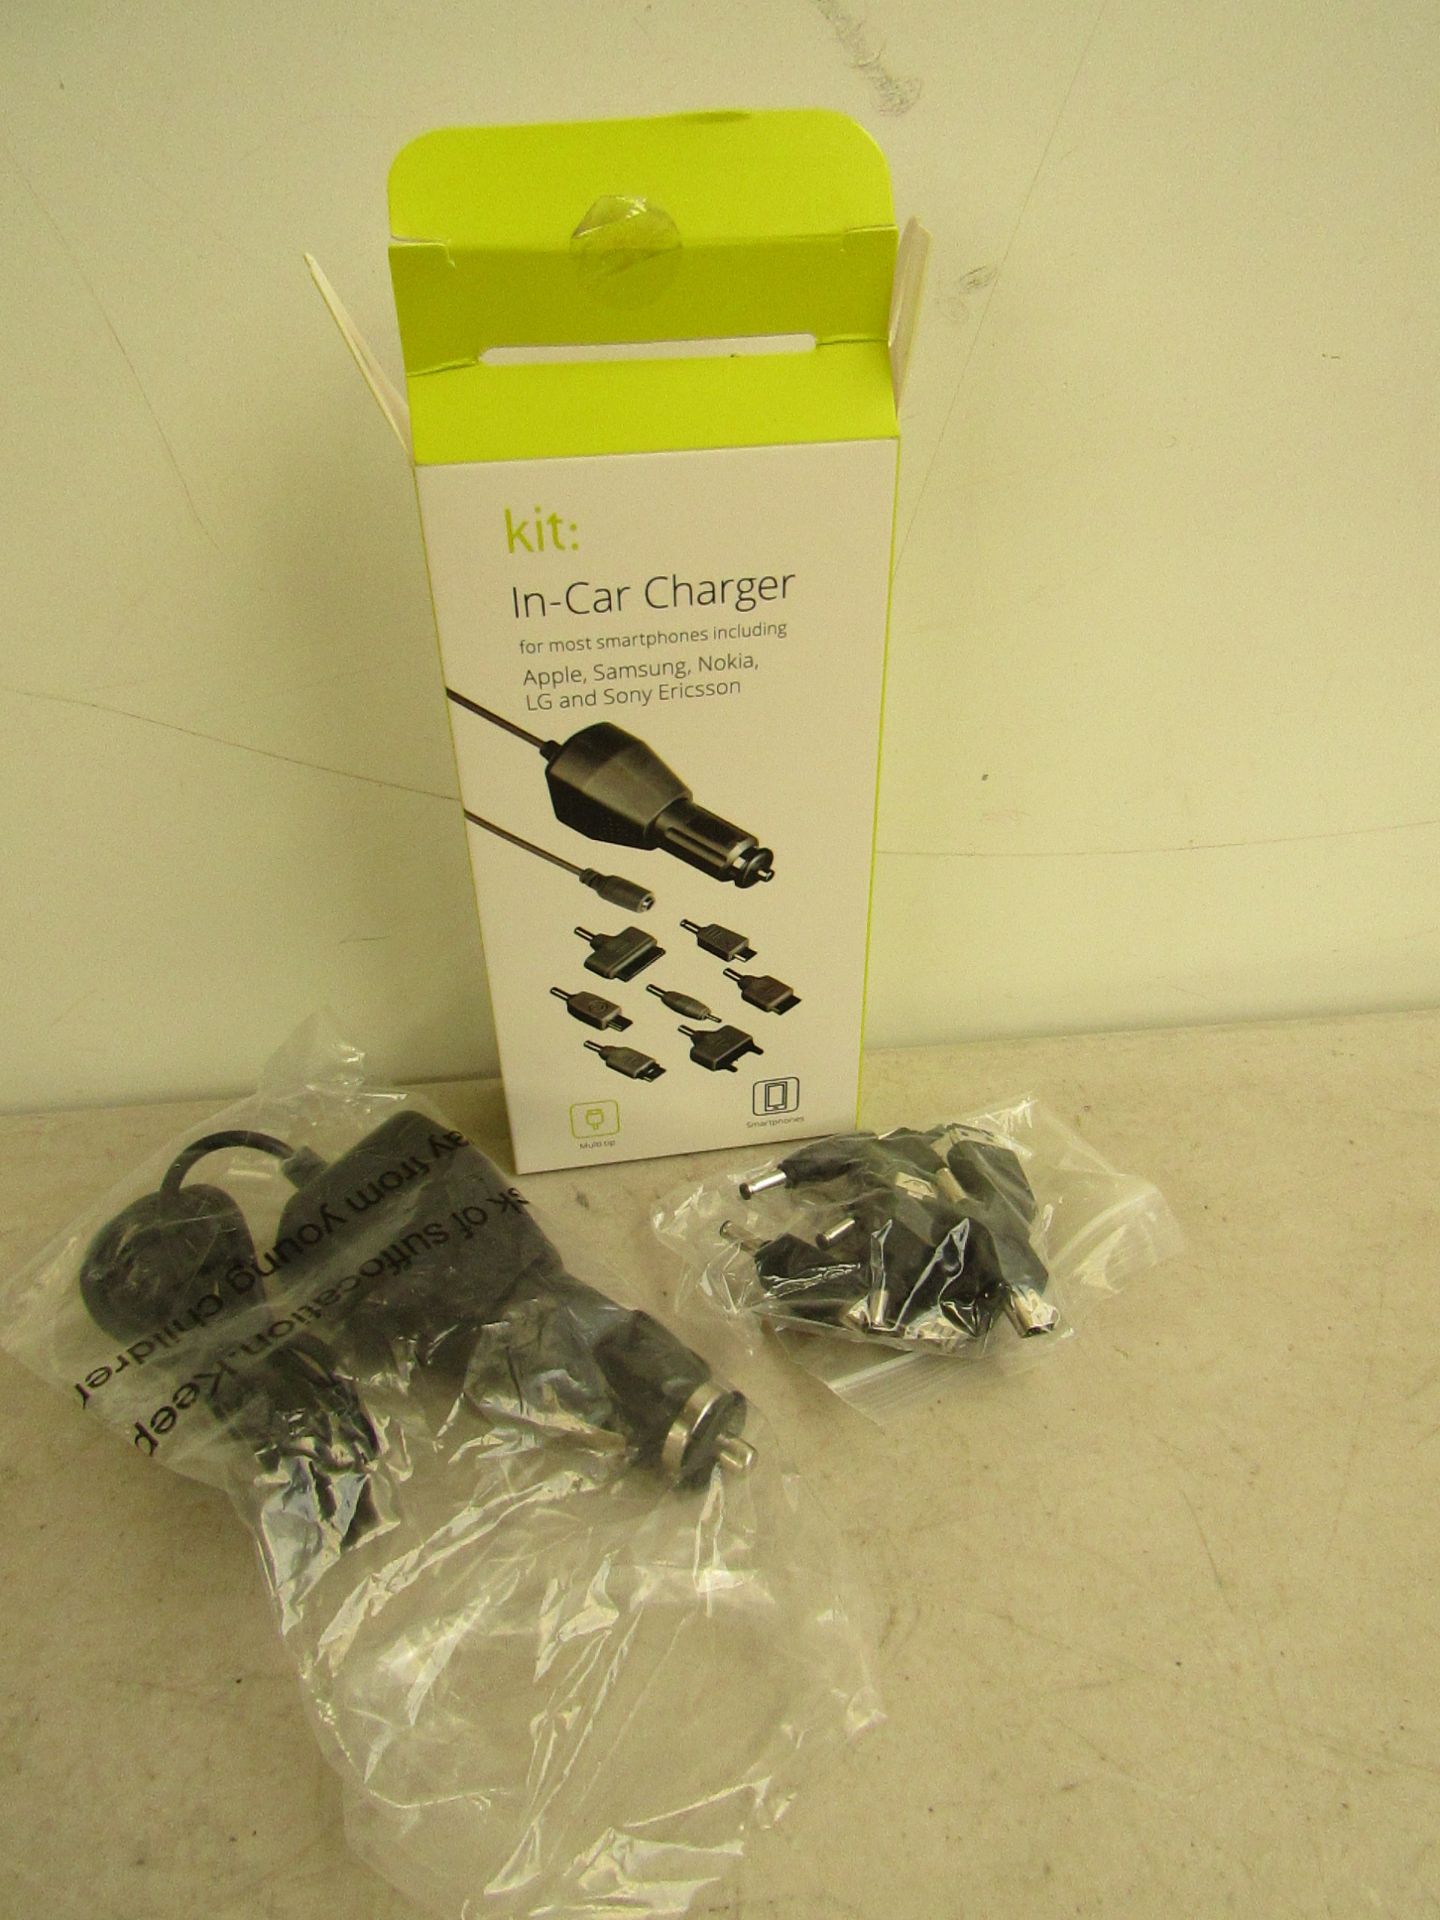 100x Kit in-car chargers, (universal) new and boxed.